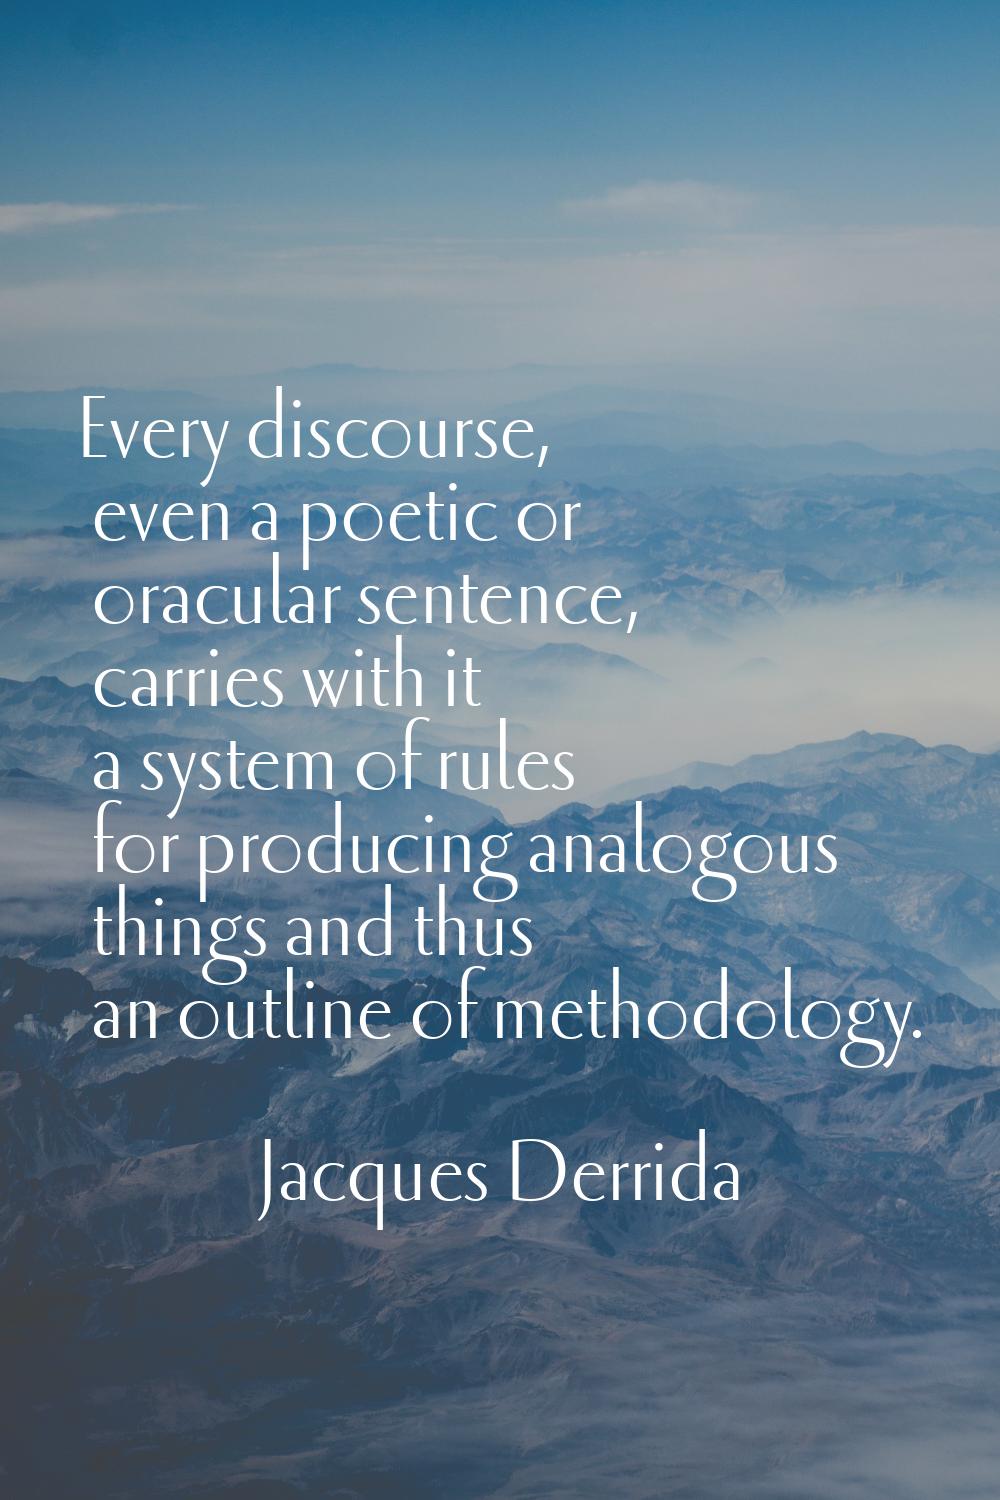 Every discourse, even a poetic or oracular sentence, carries with it a system of rules for producin